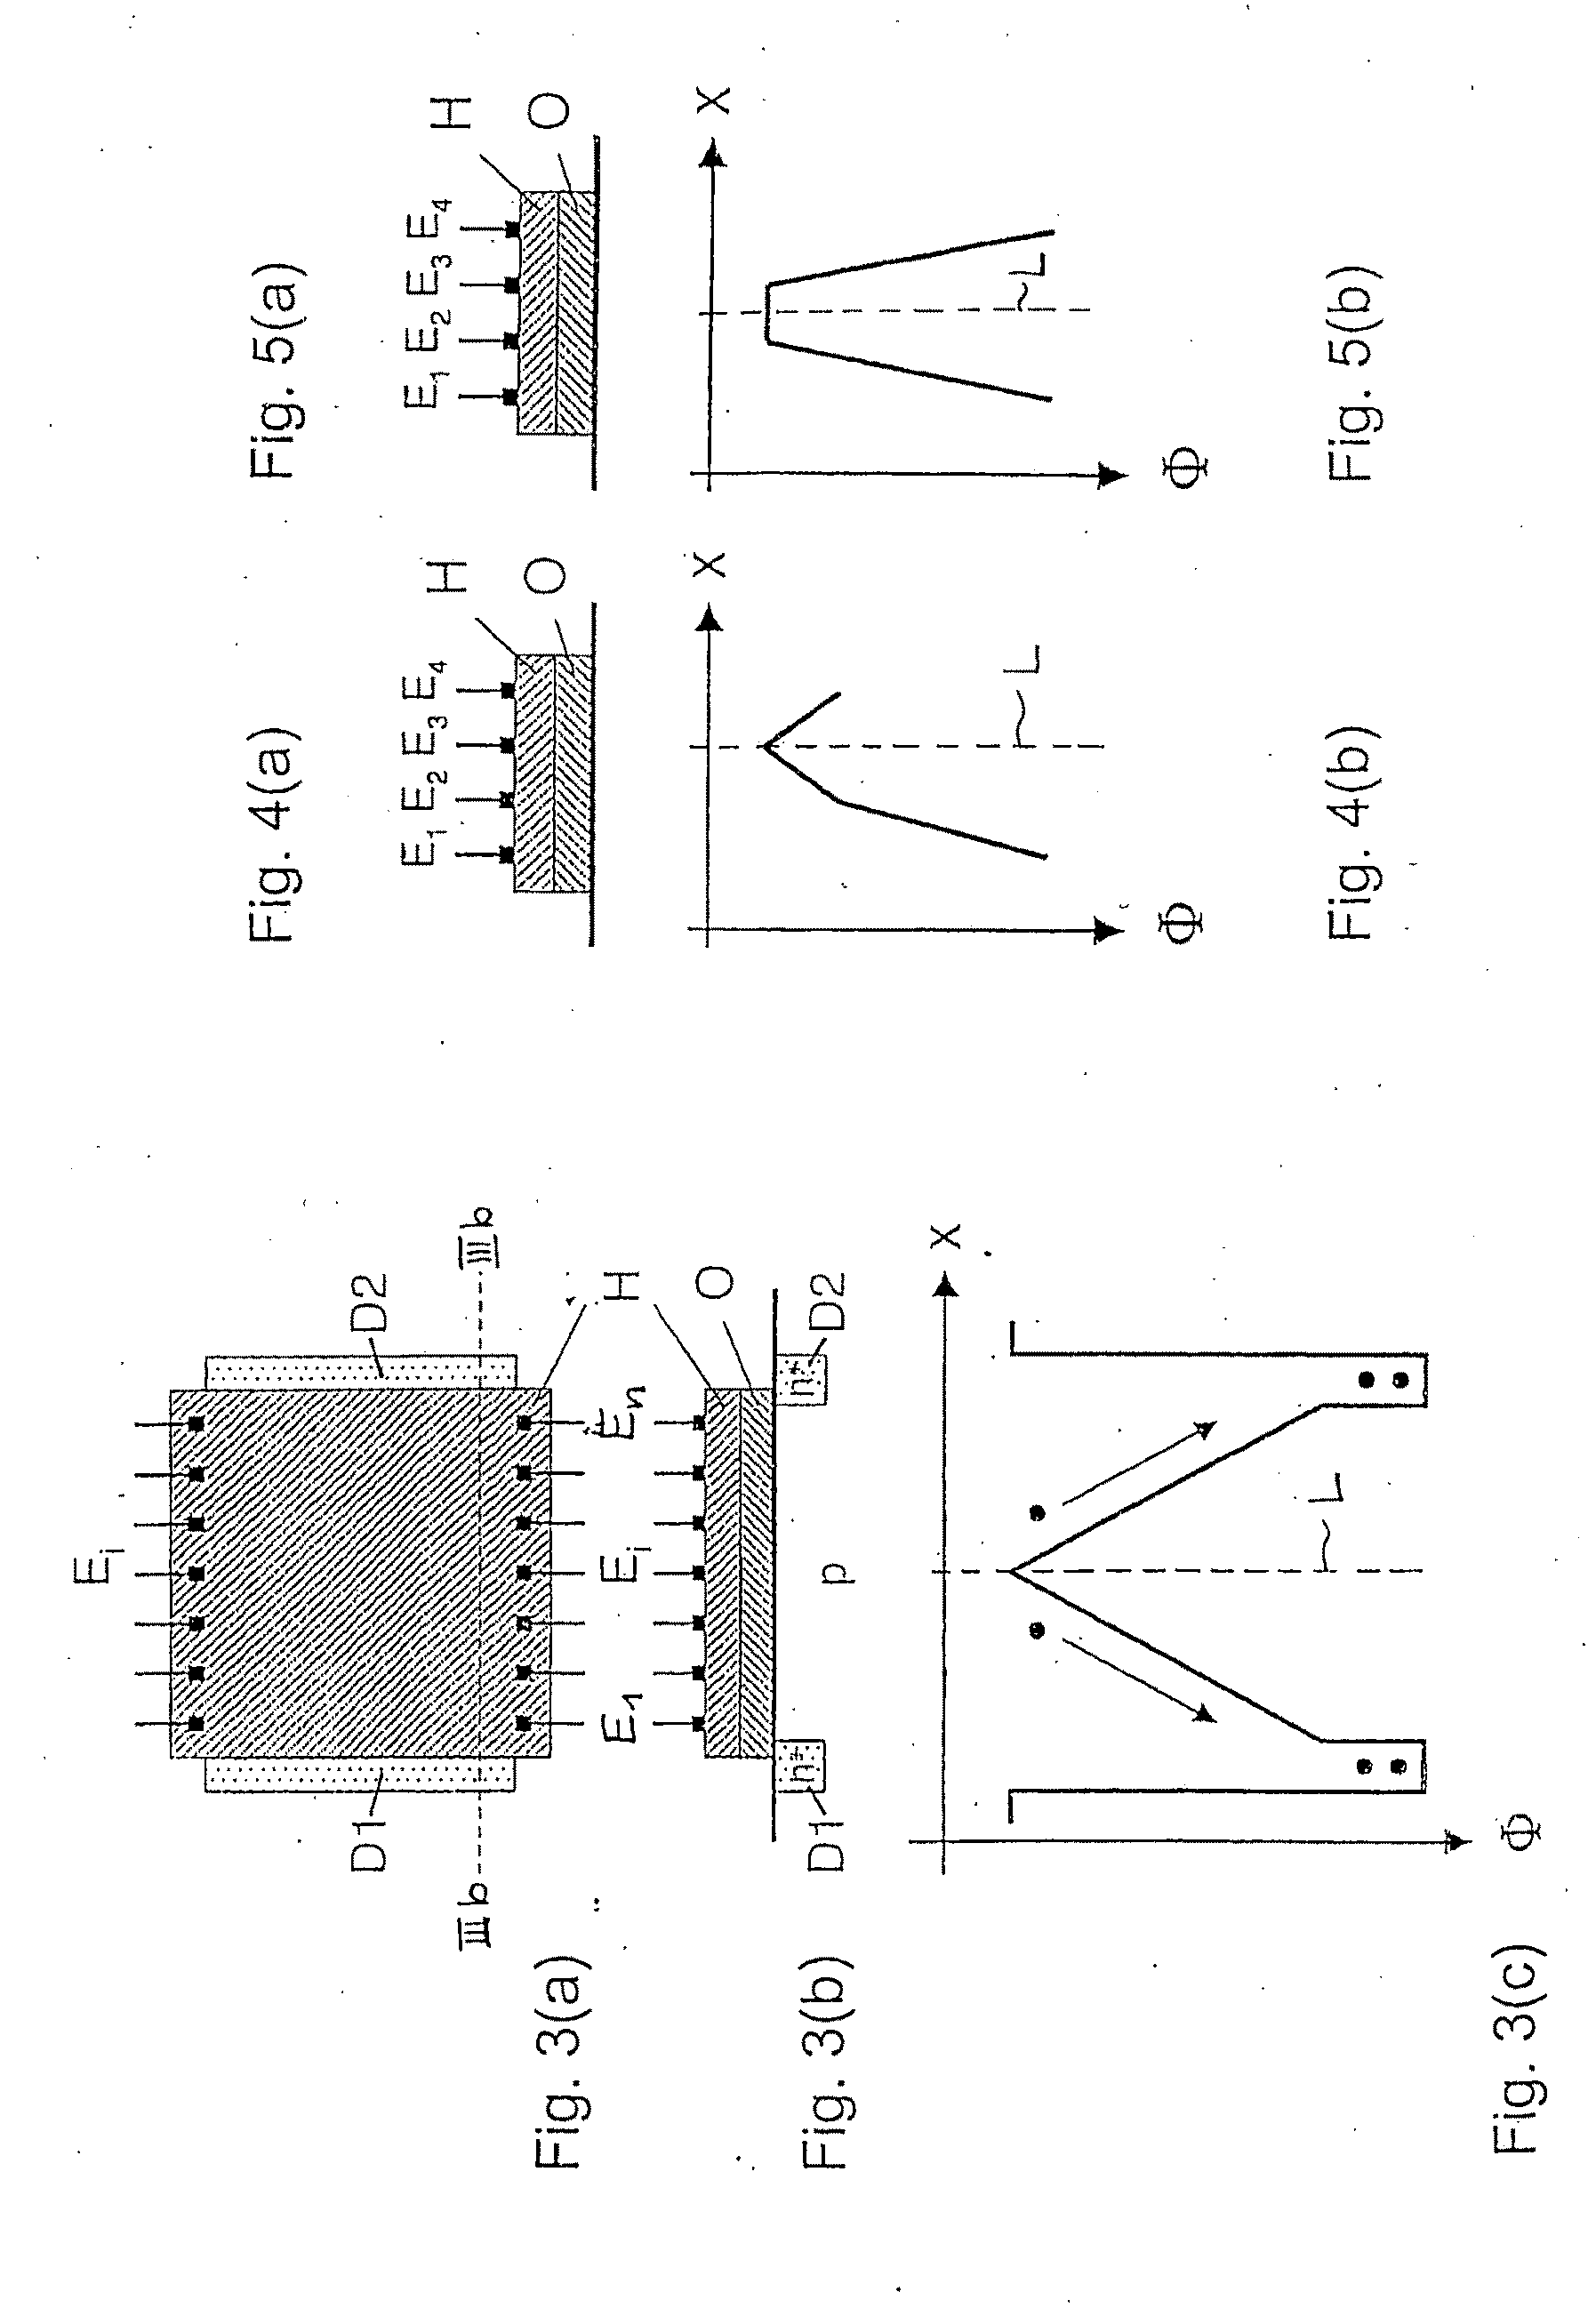 Solid-state photosensor with electronic aperture control